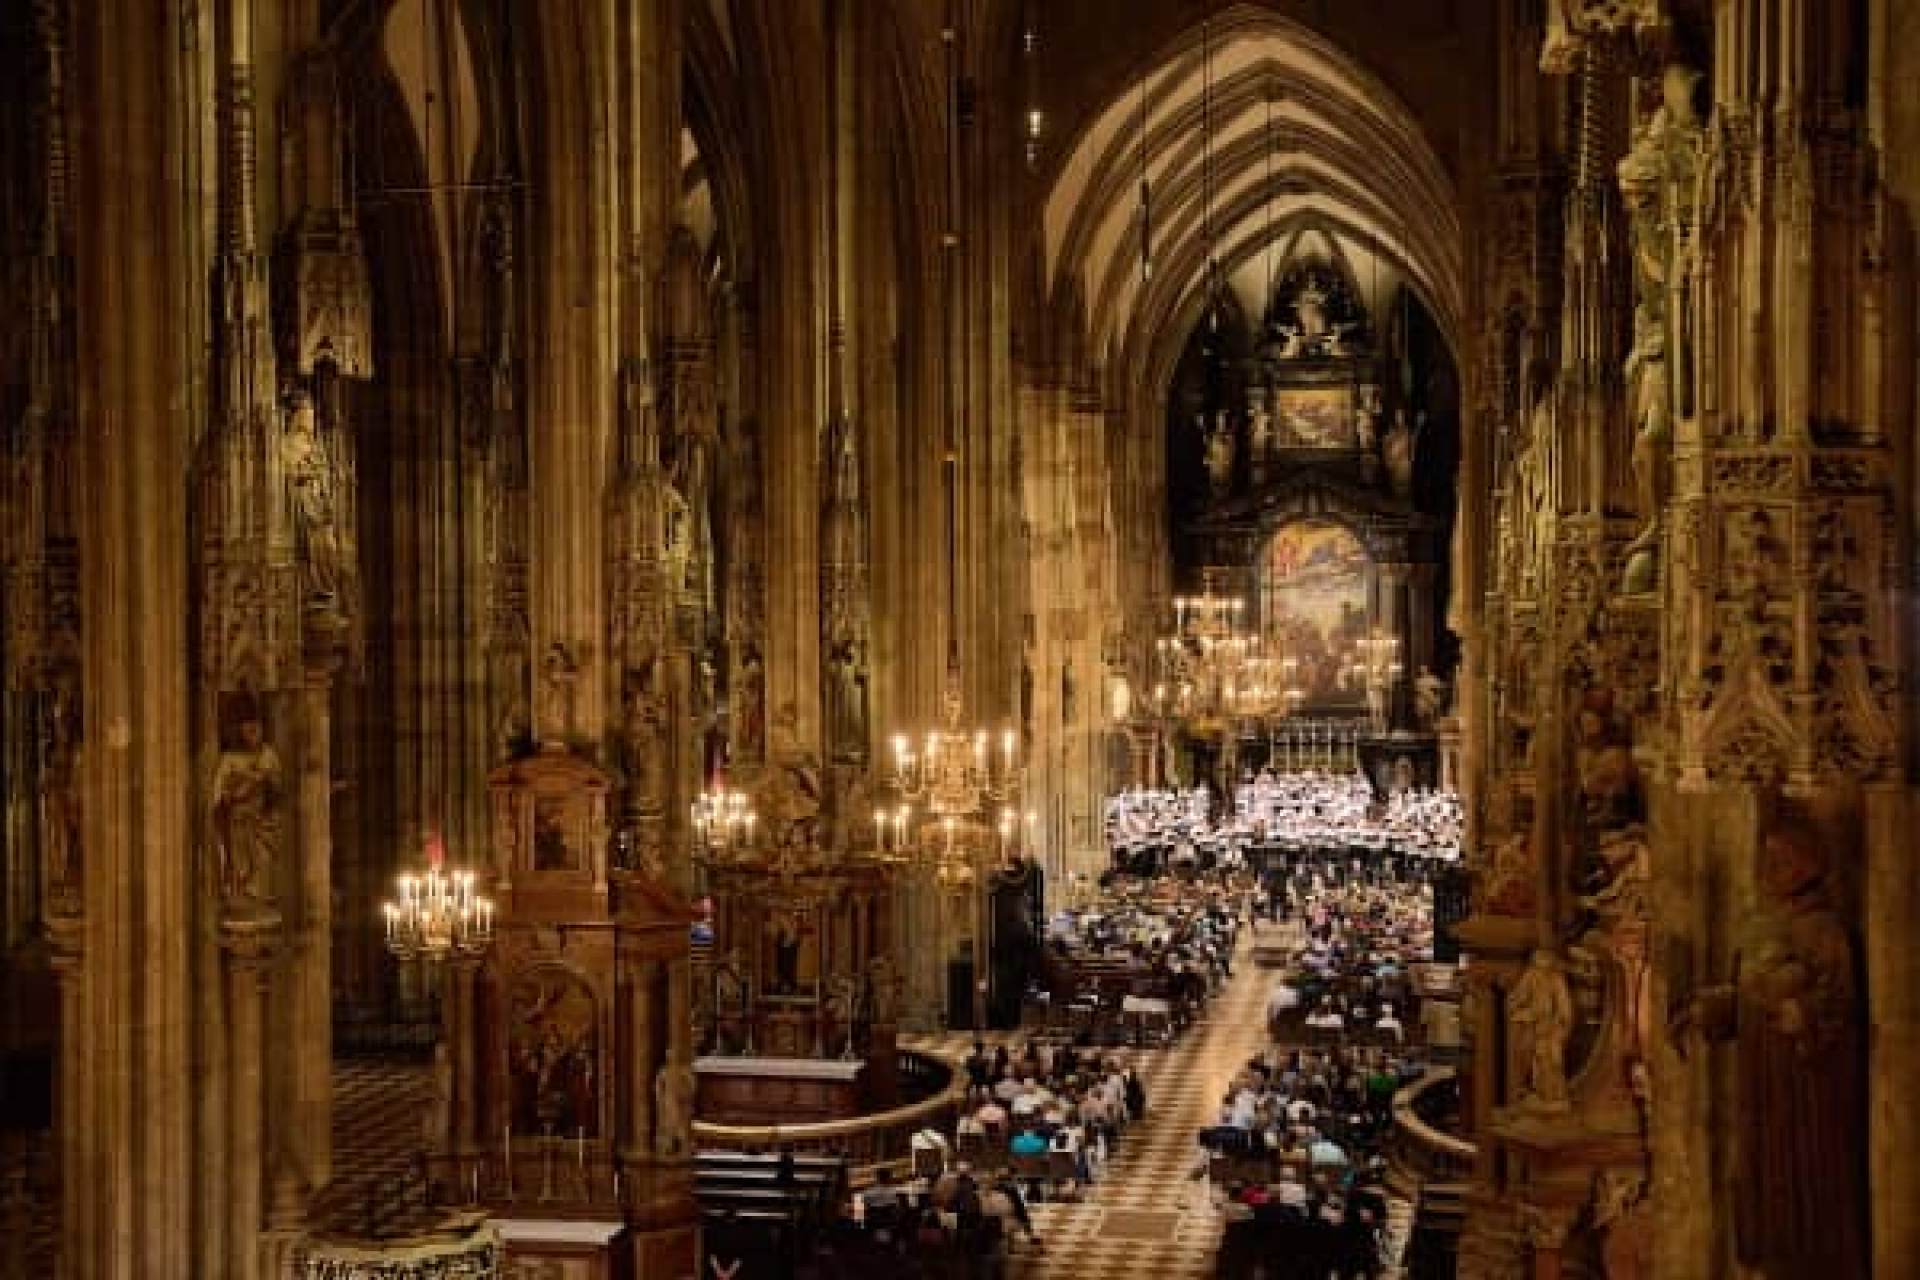 W. A. Mozart, Requiem at the Hour of His Death at St. Stephen’s Cathedral